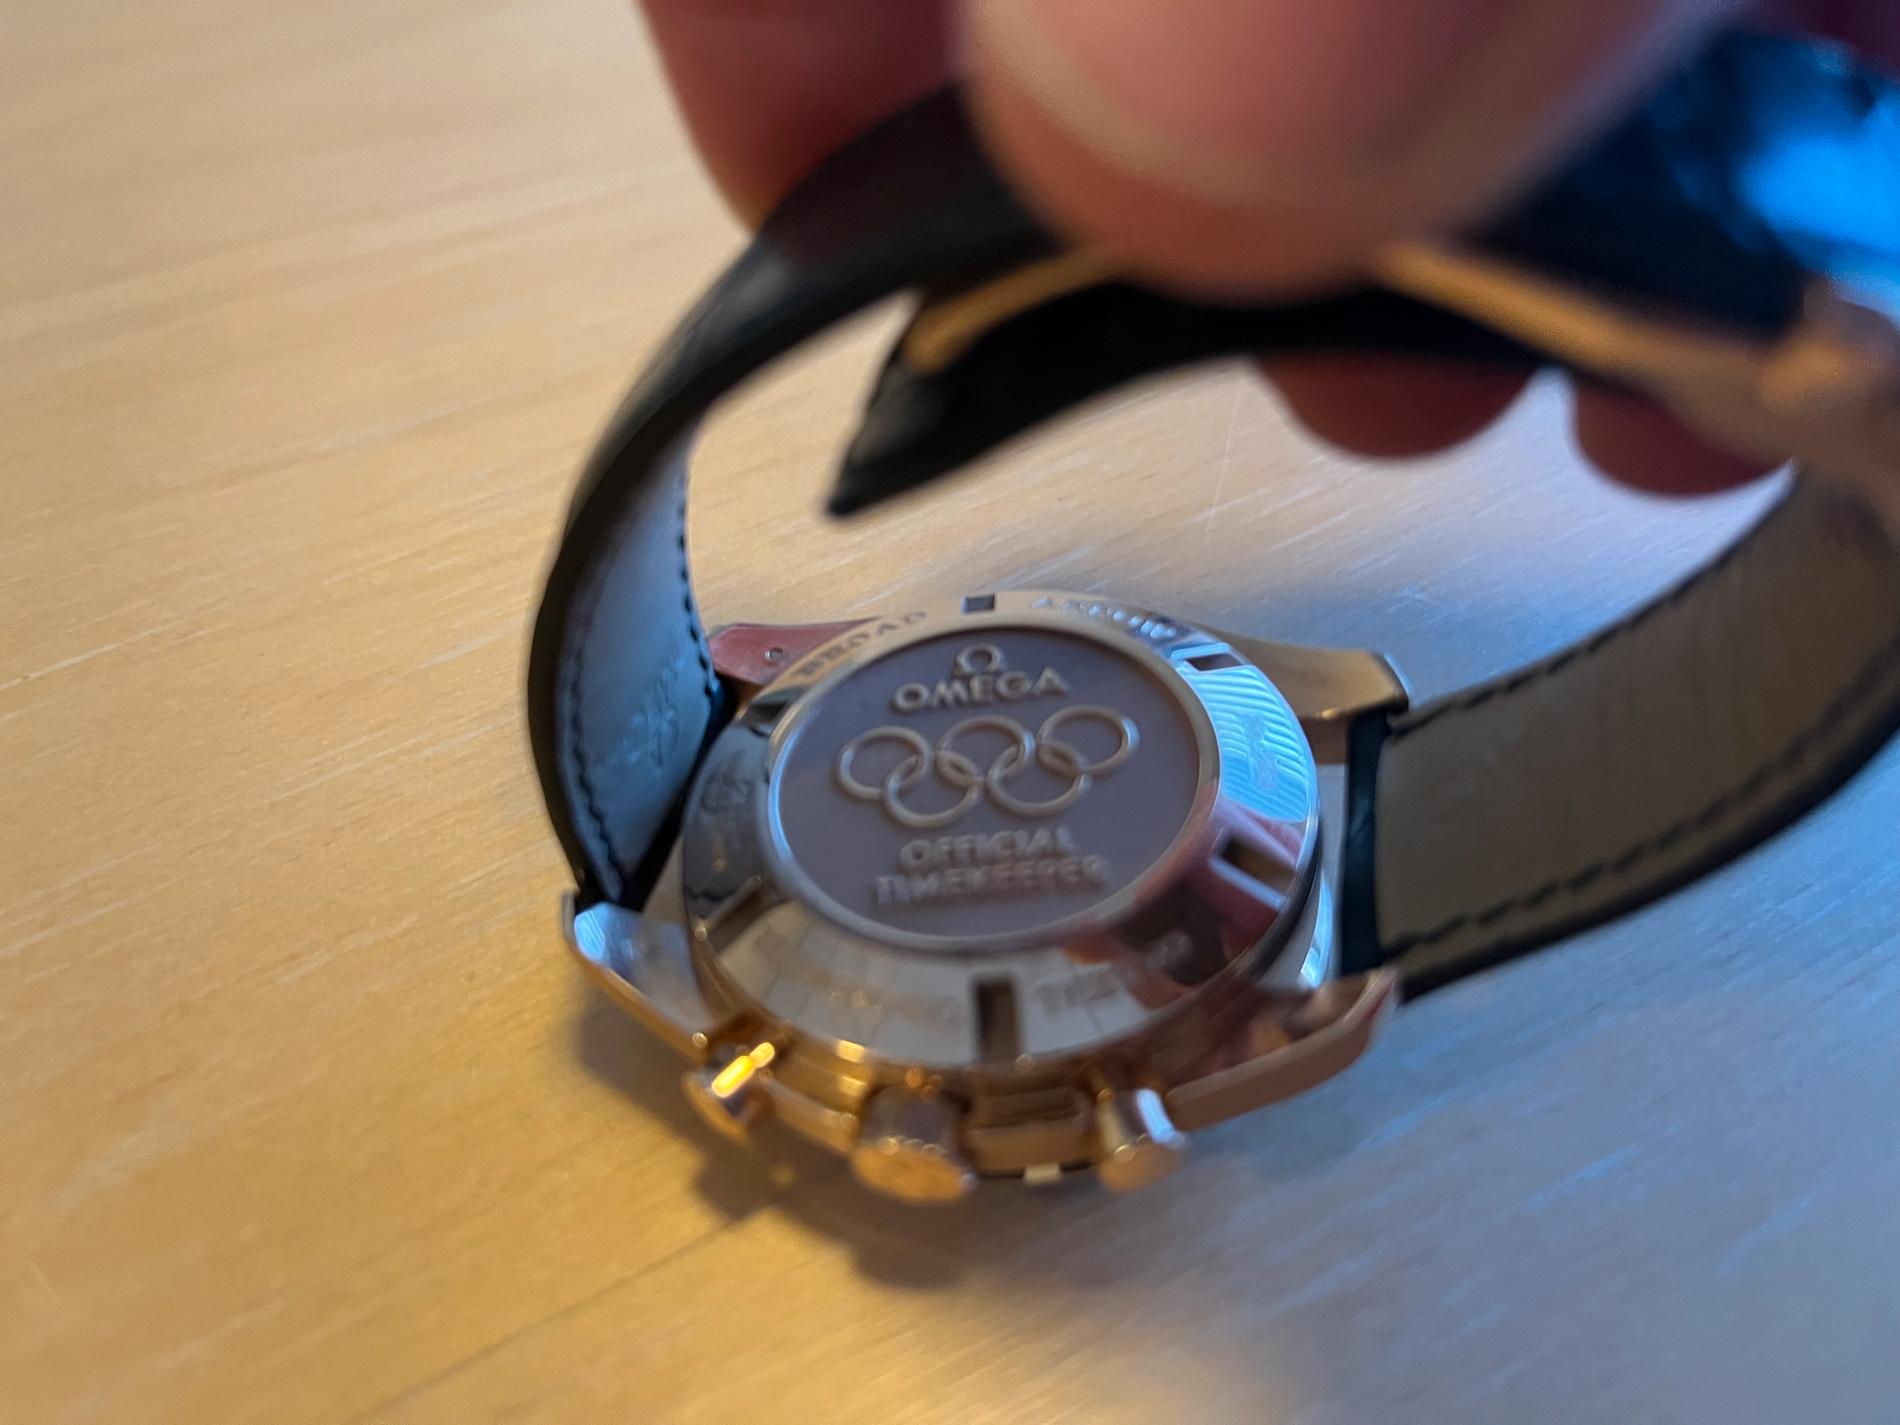 EXCLUSIVE: This is the back of the Omega watch that Bseberg received from the Russian biathlon champion.